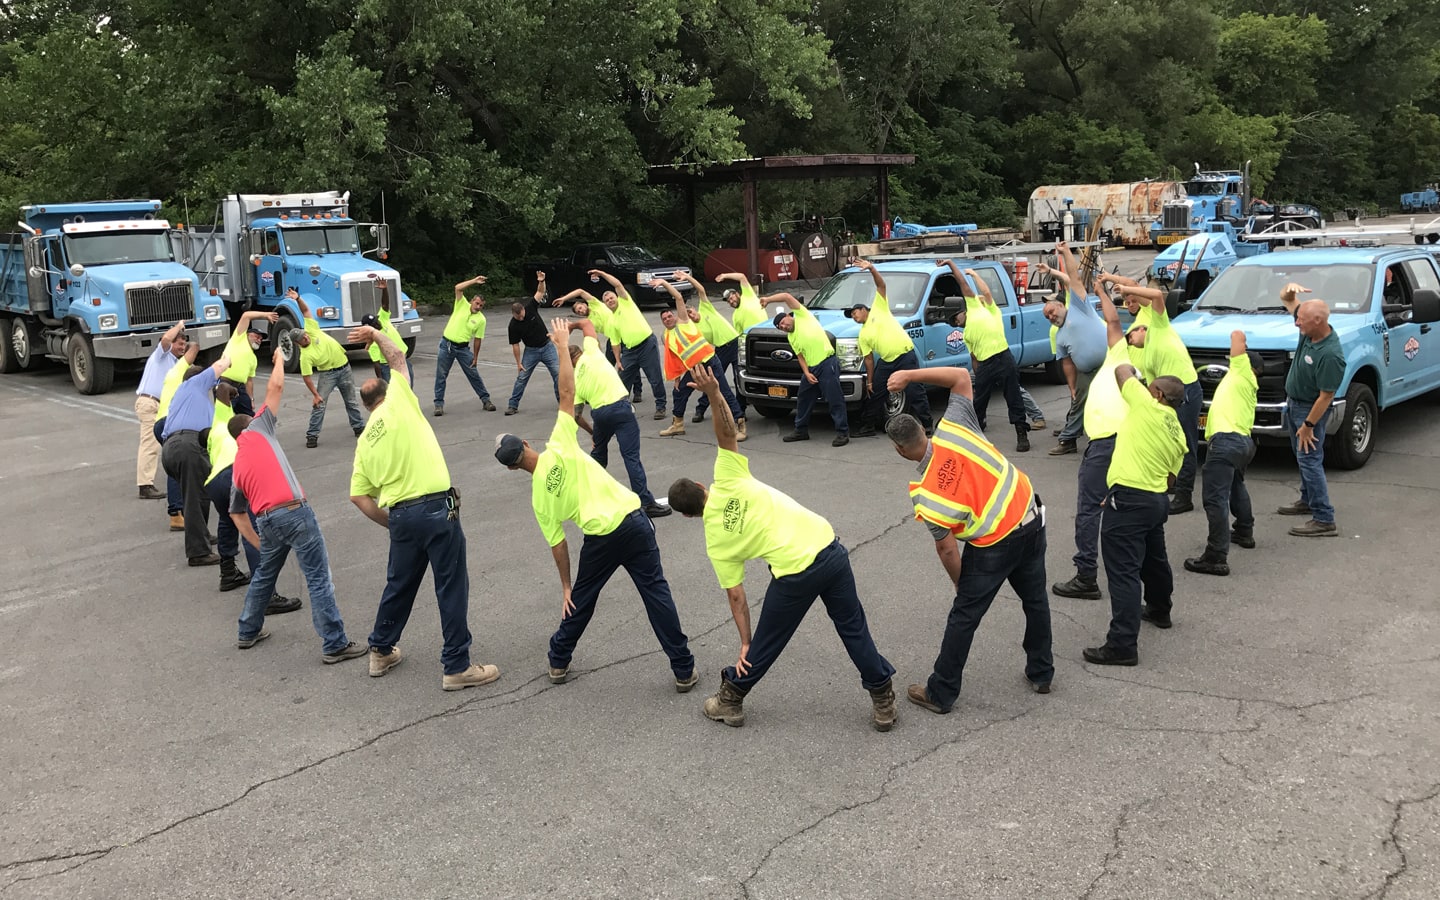 Construction workers stretching